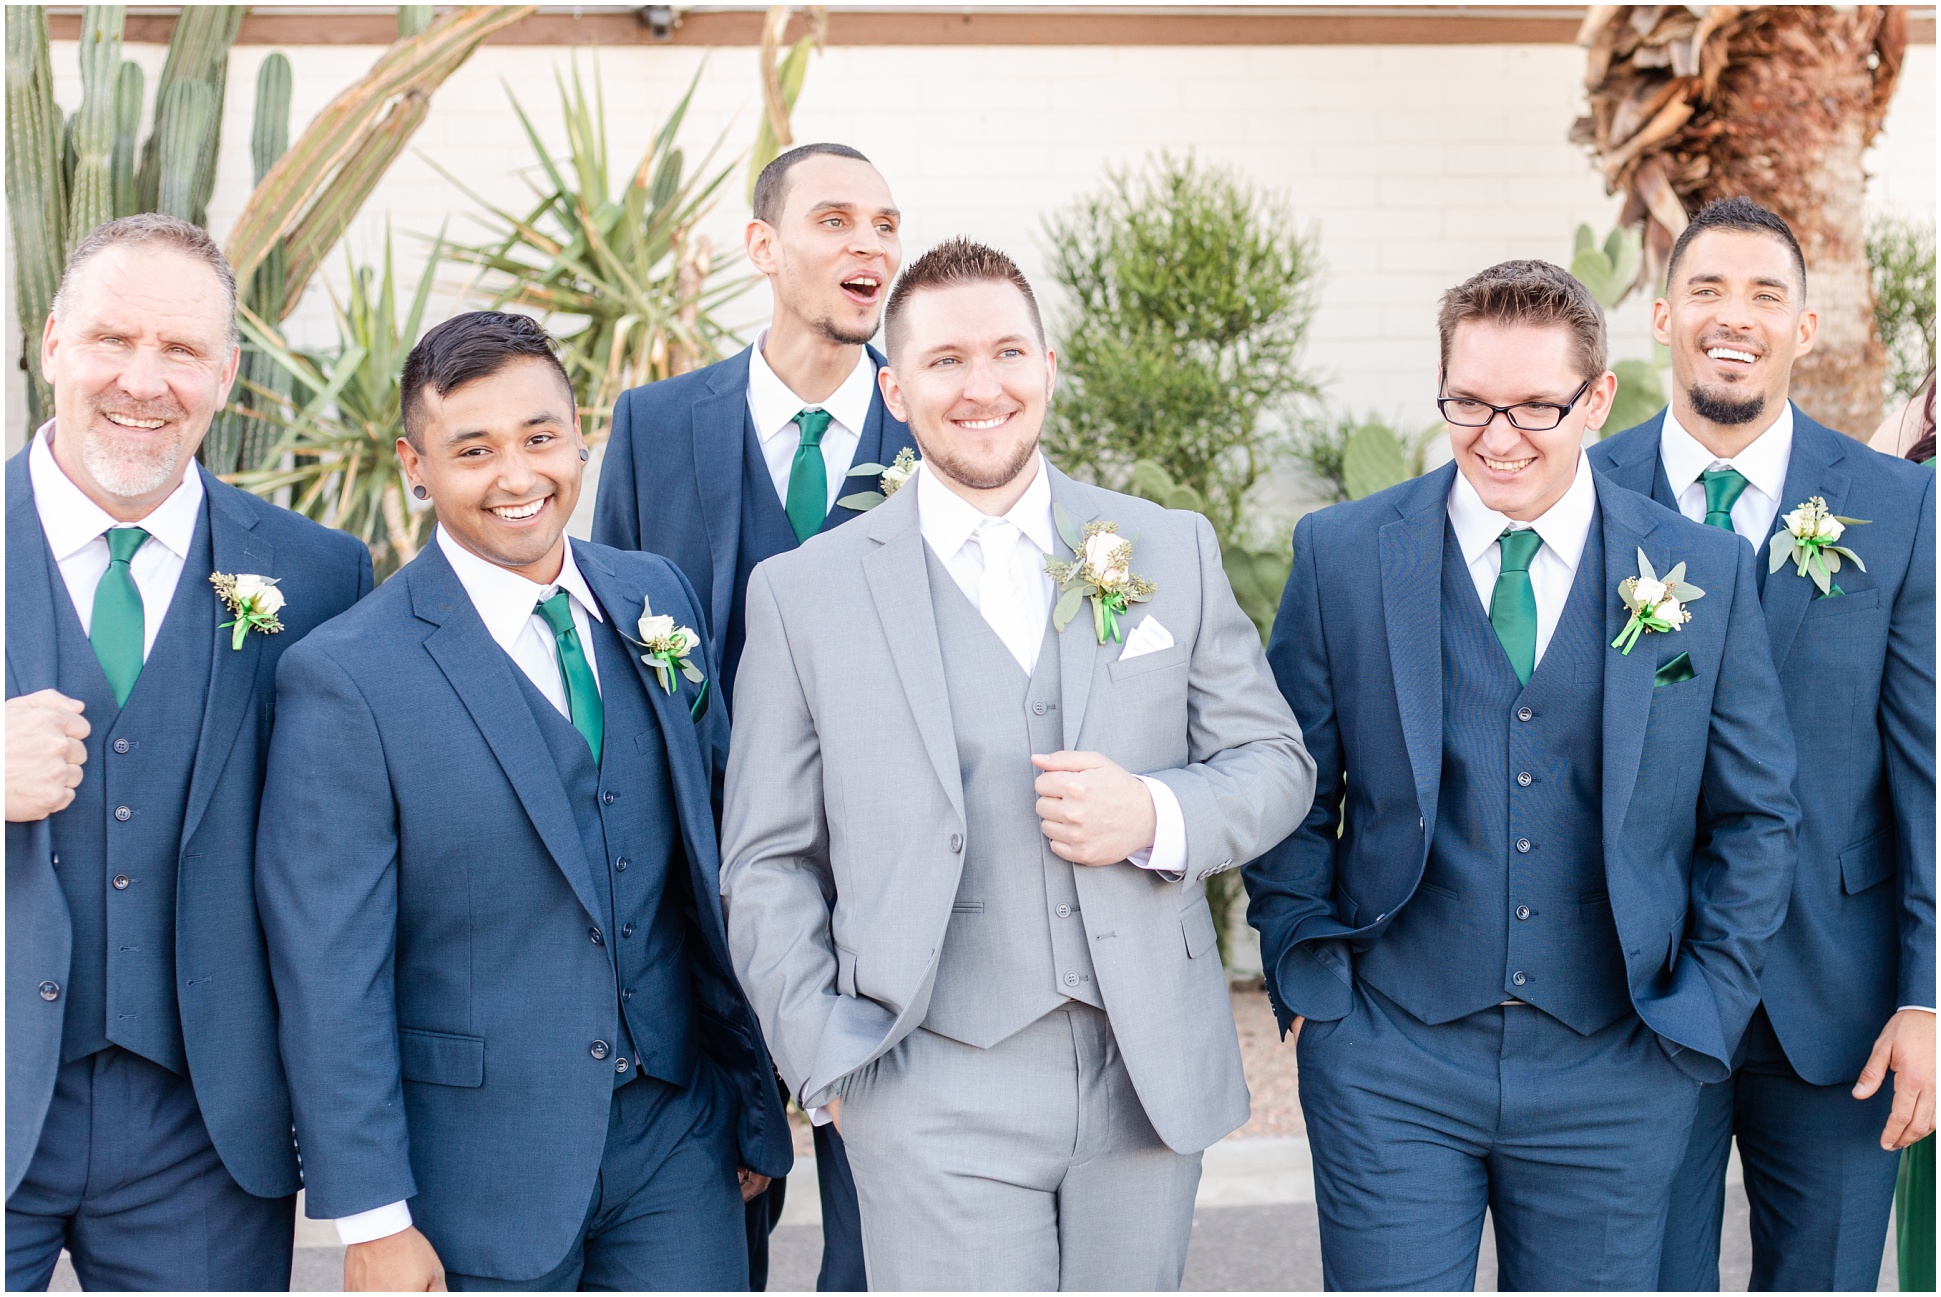 Group photo of Groom and Groomsmen laughing